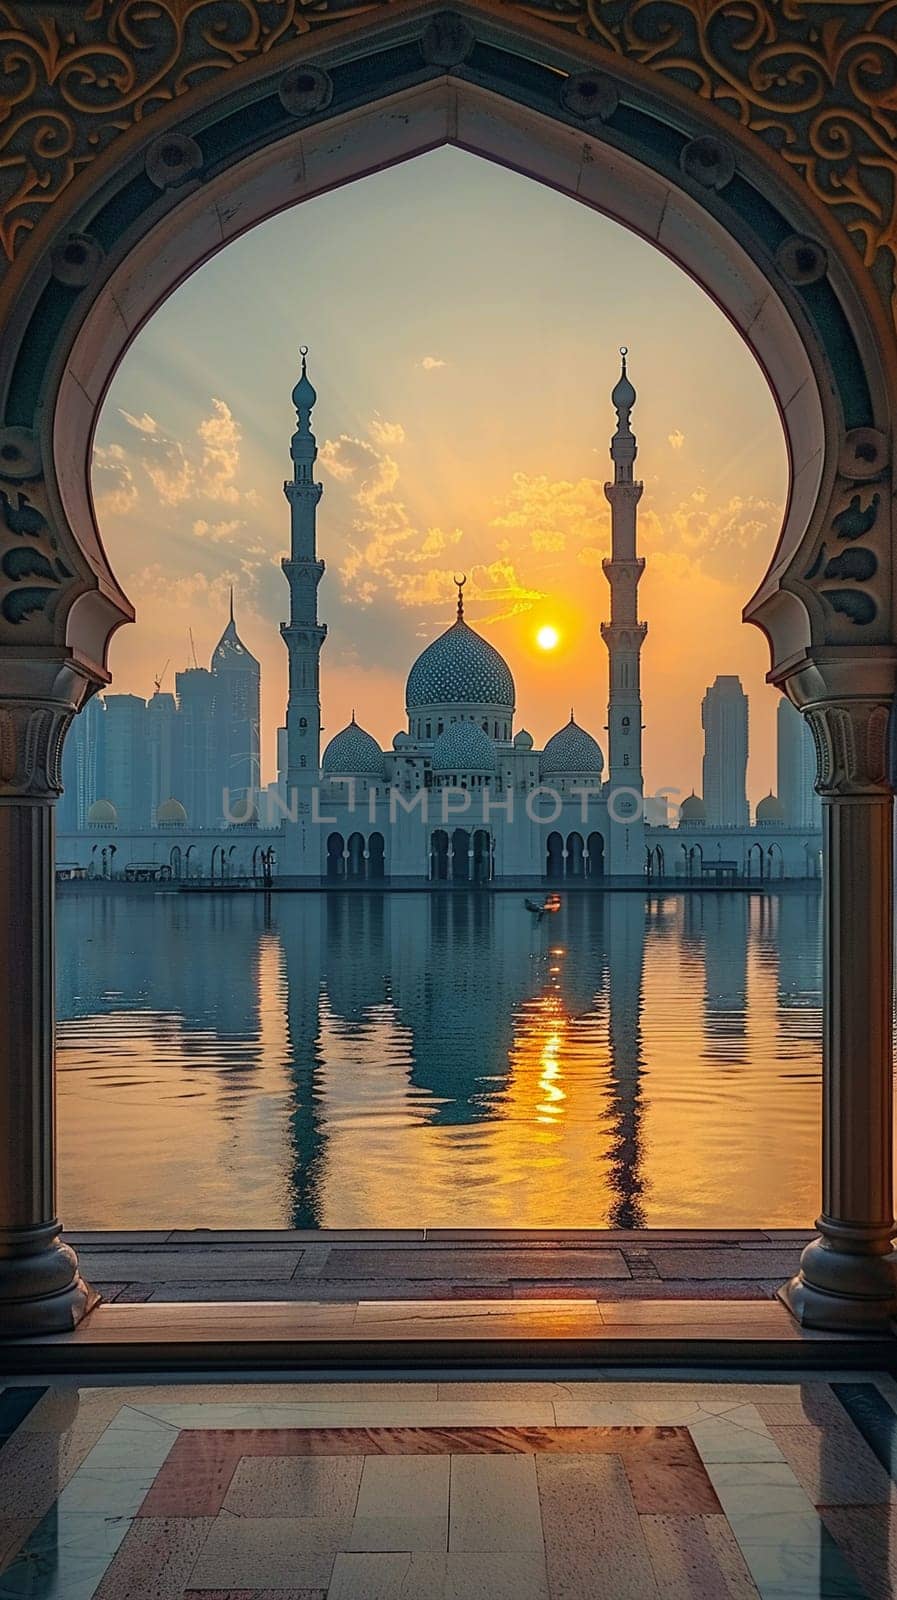 Islamic Architecture with Domes and Arches in Soft Focus, The contours blur into a skyline, symbolizing the beauty and intricacy of Islamic design.